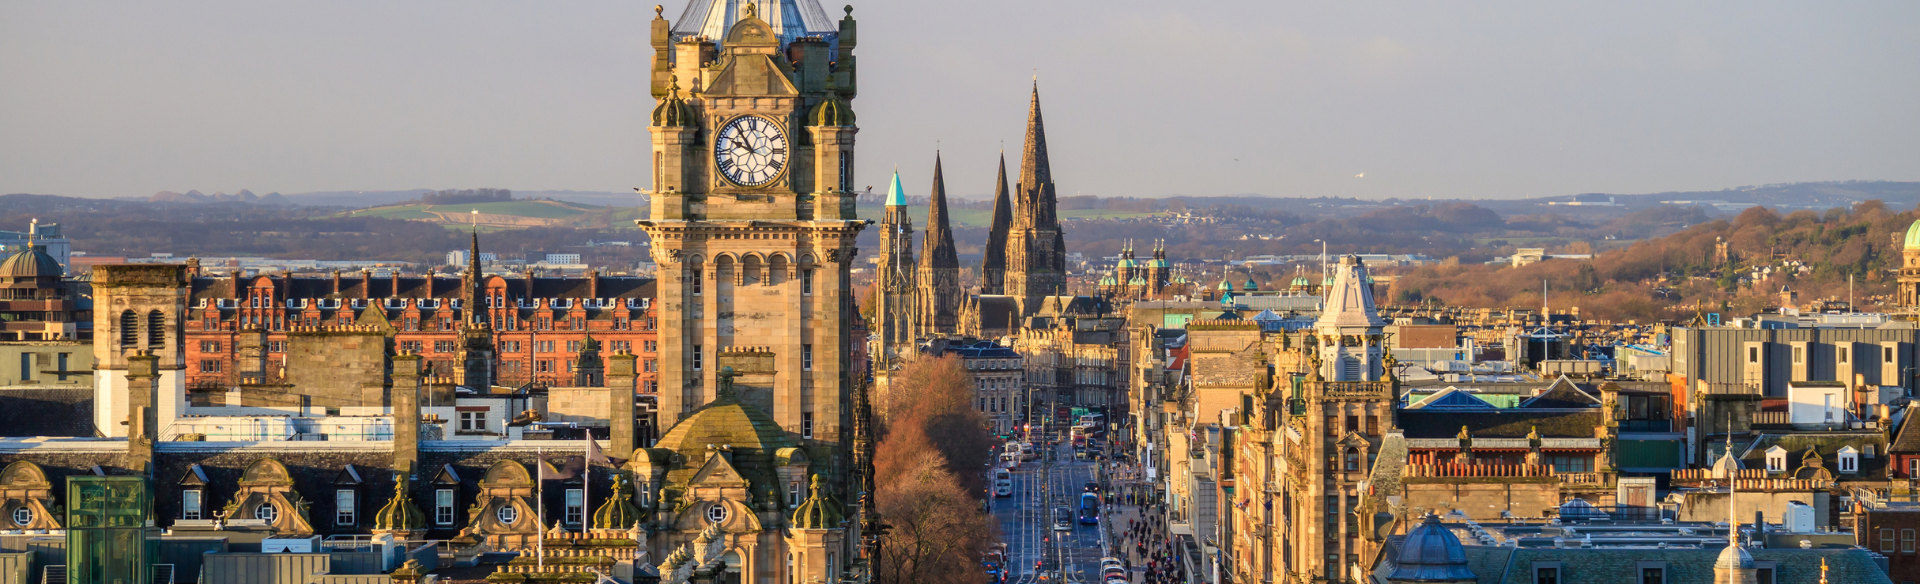 A view of Prince's Street which can be visited via direct flights to Edinburgh from the USA